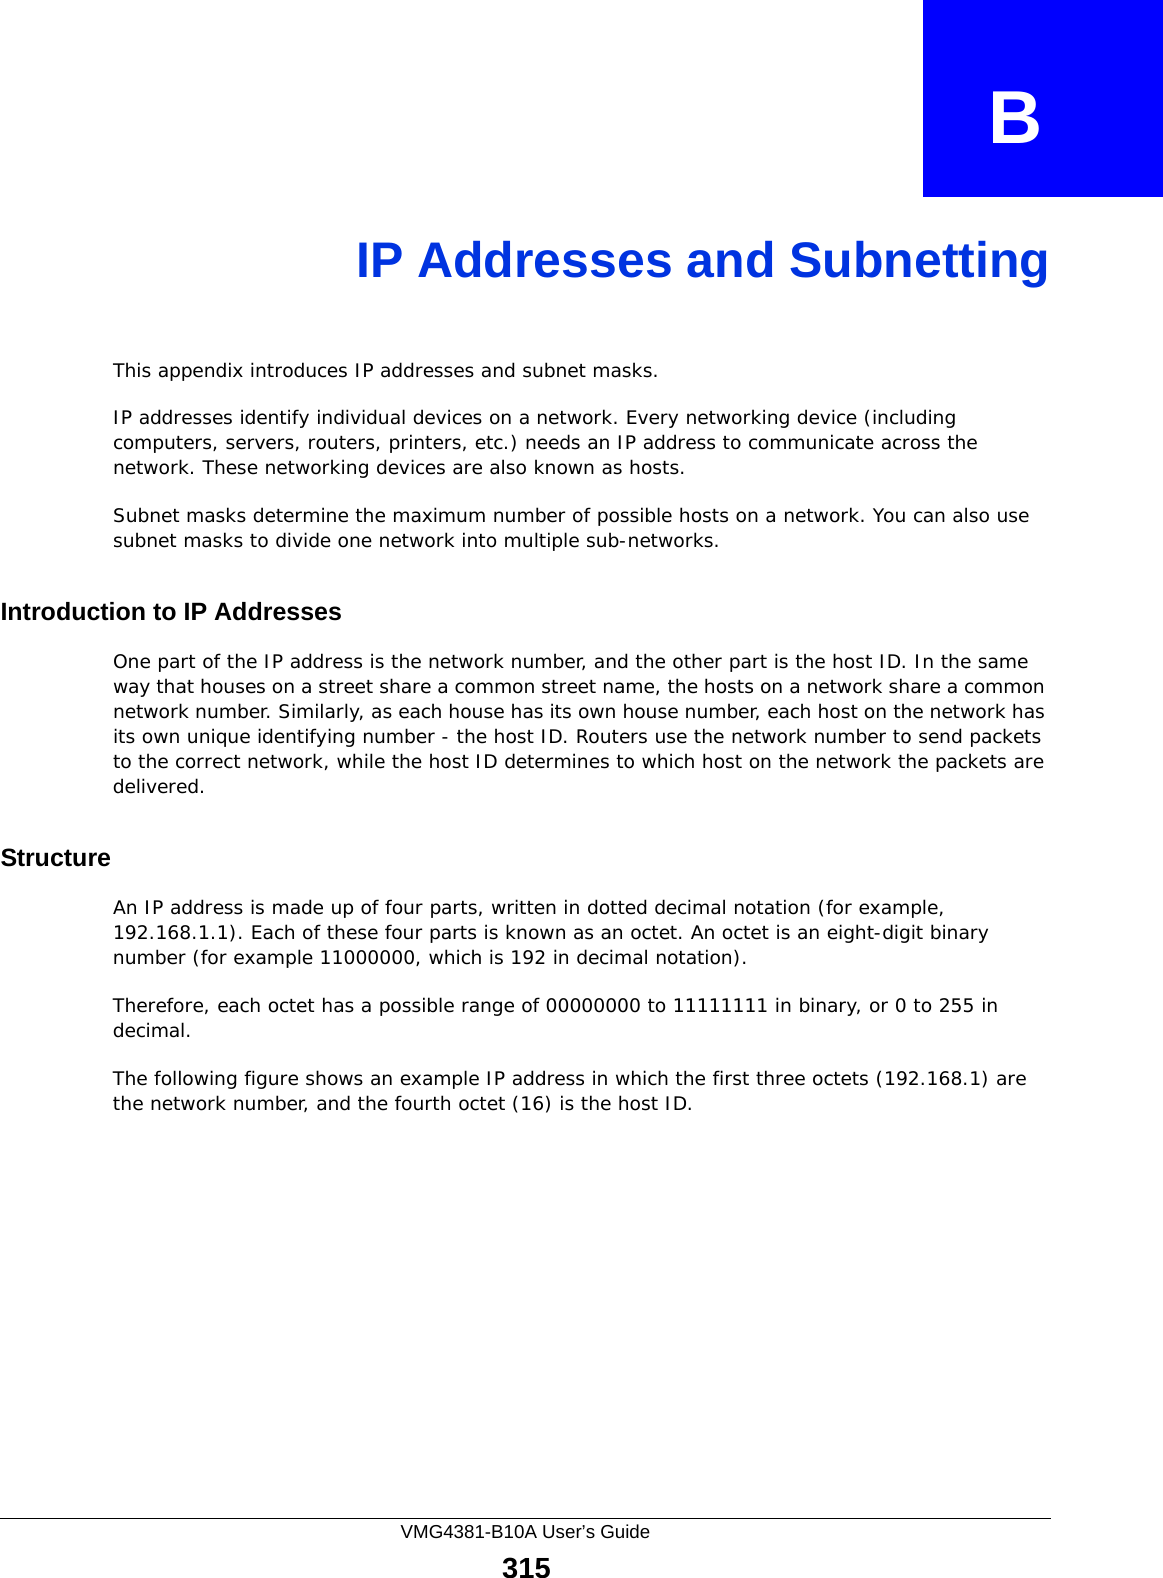 VMG4381-B10A User’s Guide315APPENDIX   BIP Addresses and SubnettingThis appendix introduces IP addresses and subnet masks. IP addresses identify individual devices on a network. Every networking device (including computers, servers, routers, printers, etc.) needs an IP address to communicate across the network. These networking devices are also known as hosts.Subnet masks determine the maximum number of possible hosts on a network. You can also use subnet masks to divide one network into multiple sub-networks.Introduction to IP AddressesOne part of the IP address is the network number, and the other part is the host ID. In the same way that houses on a street share a common street name, the hosts on a network share a common network number. Similarly, as each house has its own house number, each host on the network has its own unique identifying number - the host ID. Routers use the network number to send packets to the correct network, while the host ID determines to which host on the network the packets are delivered.StructureAn IP address is made up of four parts, written in dotted decimal notation (for example, 192.168.1.1). Each of these four parts is known as an octet. An octet is an eight-digit binary number (for example 11000000, which is 192 in decimal notation). Therefore, each octet has a possible range of 00000000 to 11111111 in binary, or 0 to 255 in decimal.The following figure shows an example IP address in which the first three octets (192.168.1) are the network number, and the fourth octet (16) is the host ID.